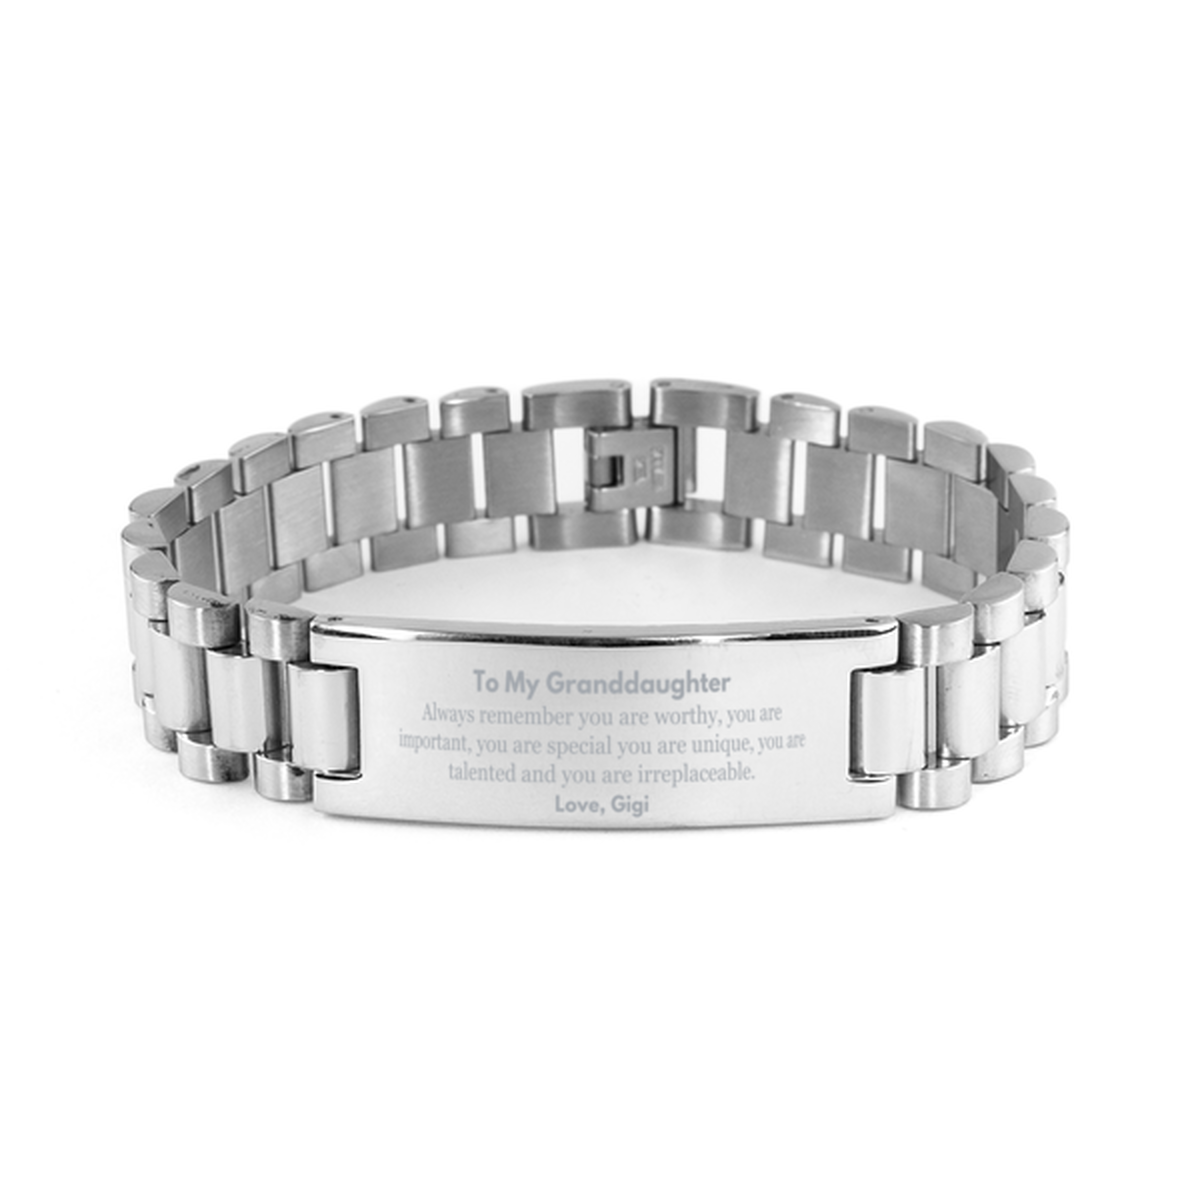 Granddaughter Birthday Gifts from Gigi, Inspirational Ladder Stainless Steel Bracelet for Granddaughter Christmas Graduation Gifts for Granddaughter Always remember you are worthy, you are important. Love, Gigi